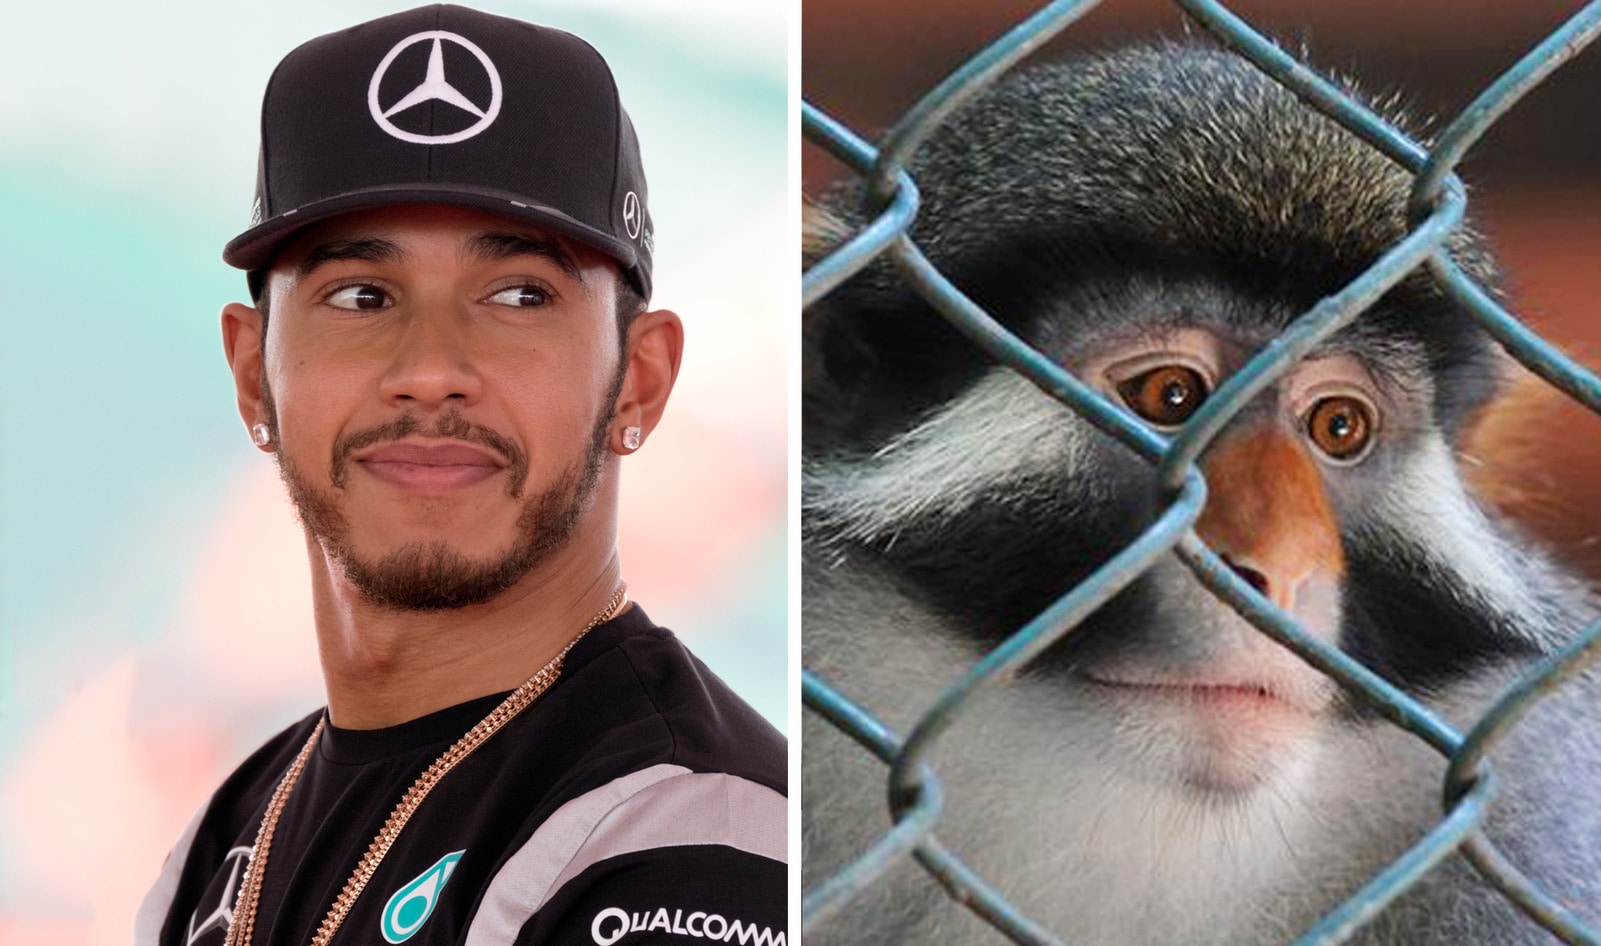 Lewis Hamilton Urges Fans to Make Connection Between COVID-19 Isolation and Zoo Animal Suffering